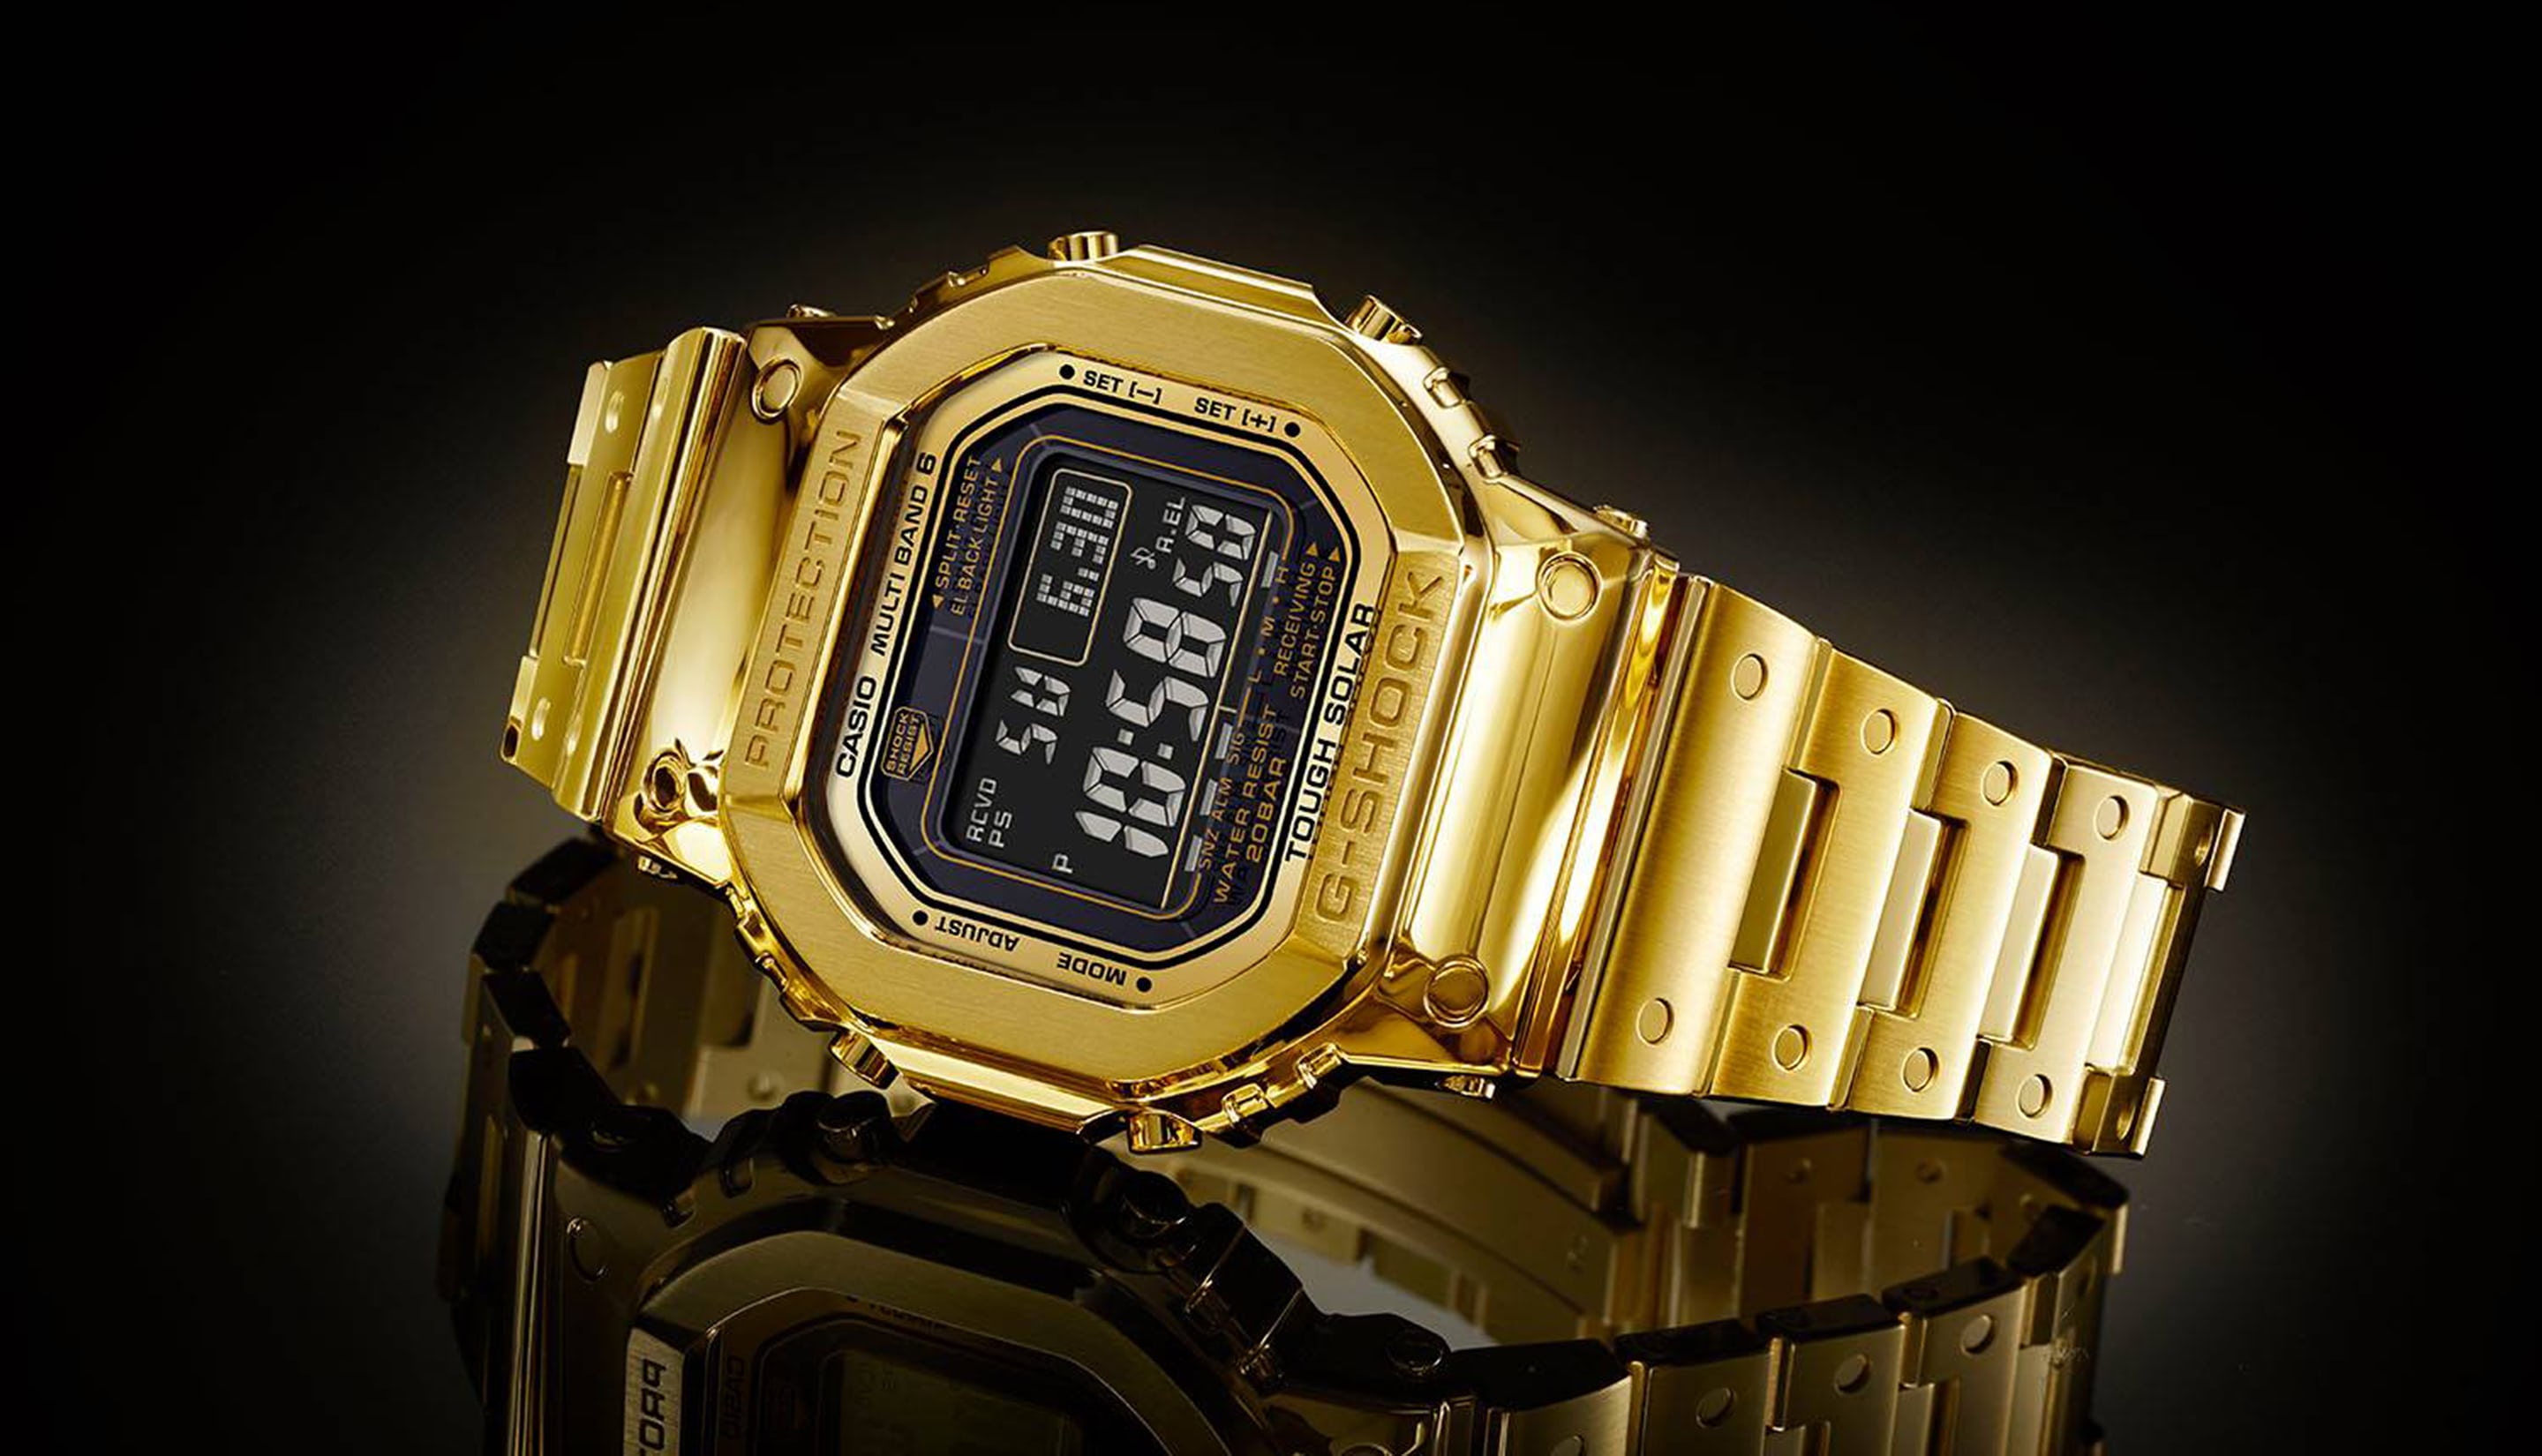 New G-Shock Full Metal Watches Show There's No Place Casio Won't Go -  Bloomberg